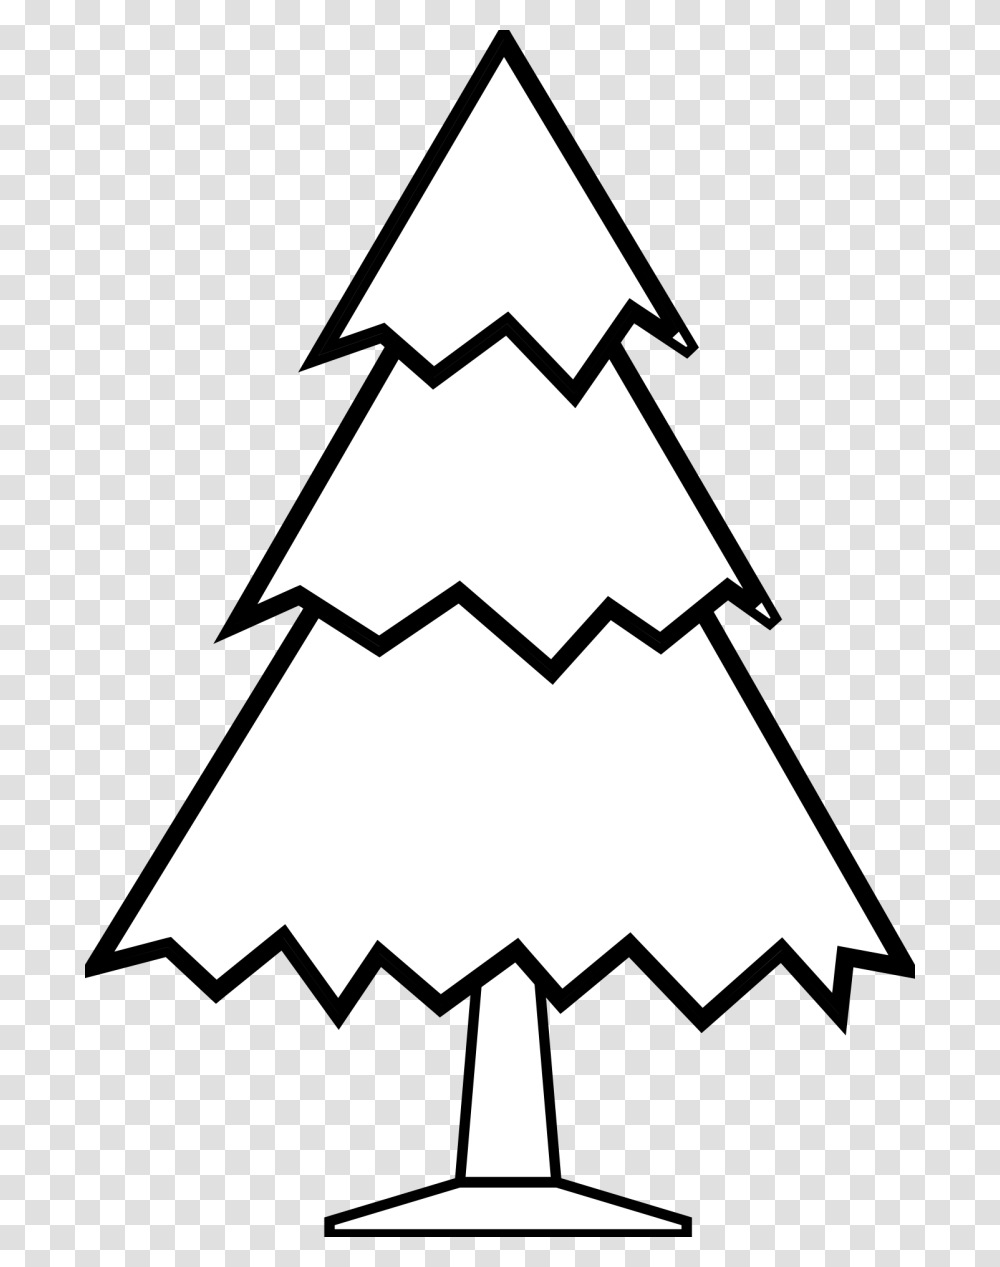 Christmas Tree Clipart Black And White Free Christmas Tree Clipart Black And White, Plant, Ornament, Star Symbol Transparent Png